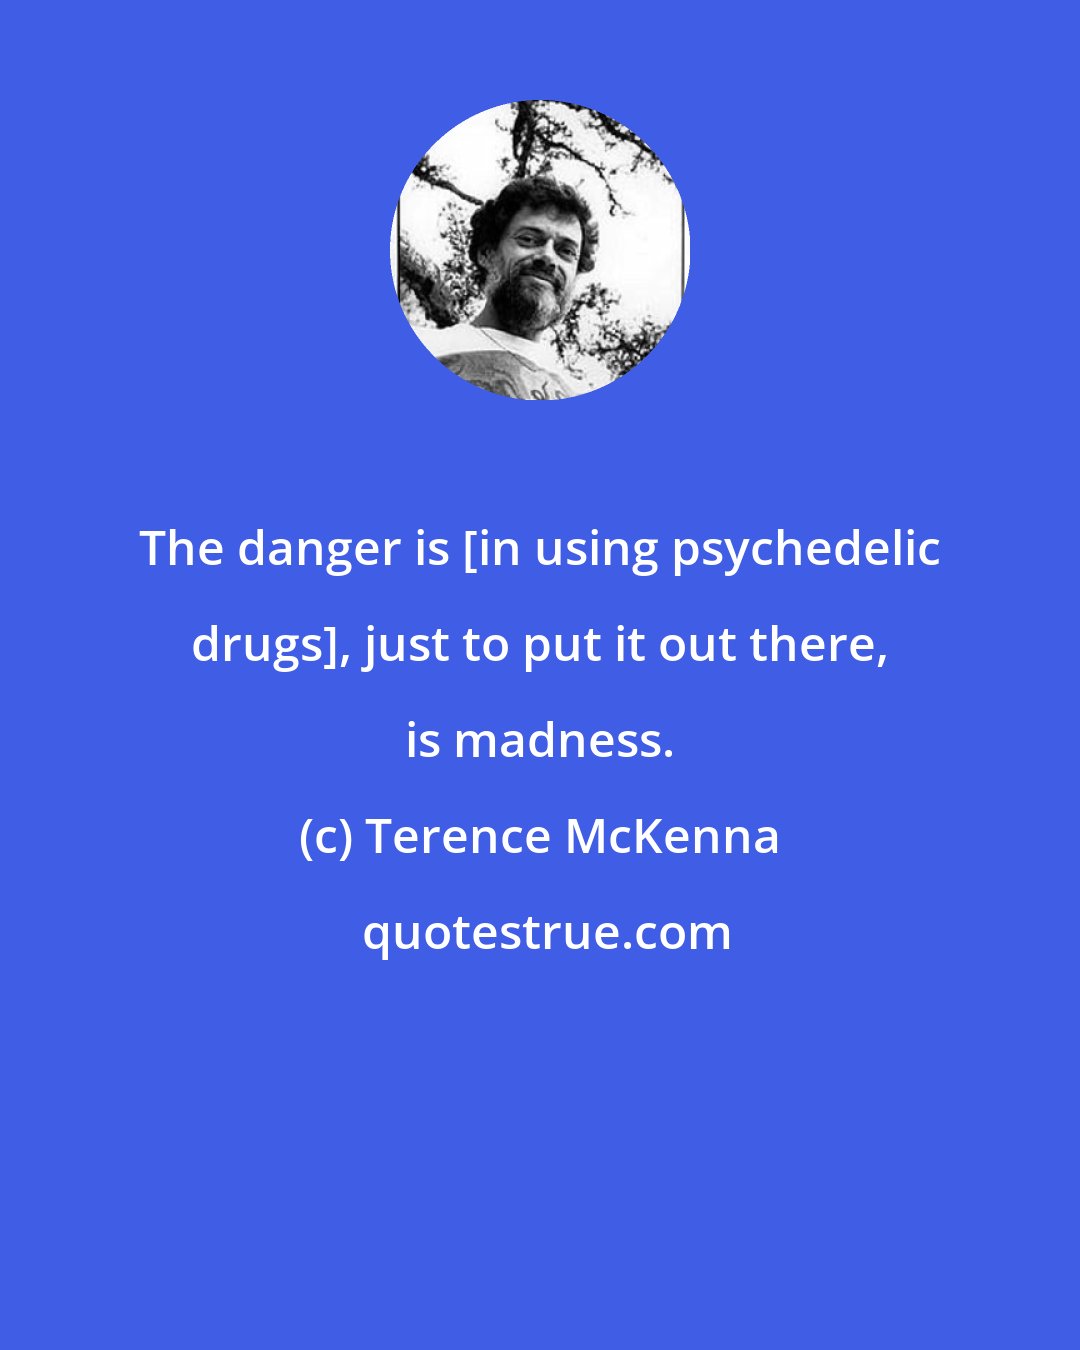 Terence McKenna: The danger is [in using psychedelic drugs], just to put it out there, is madness.